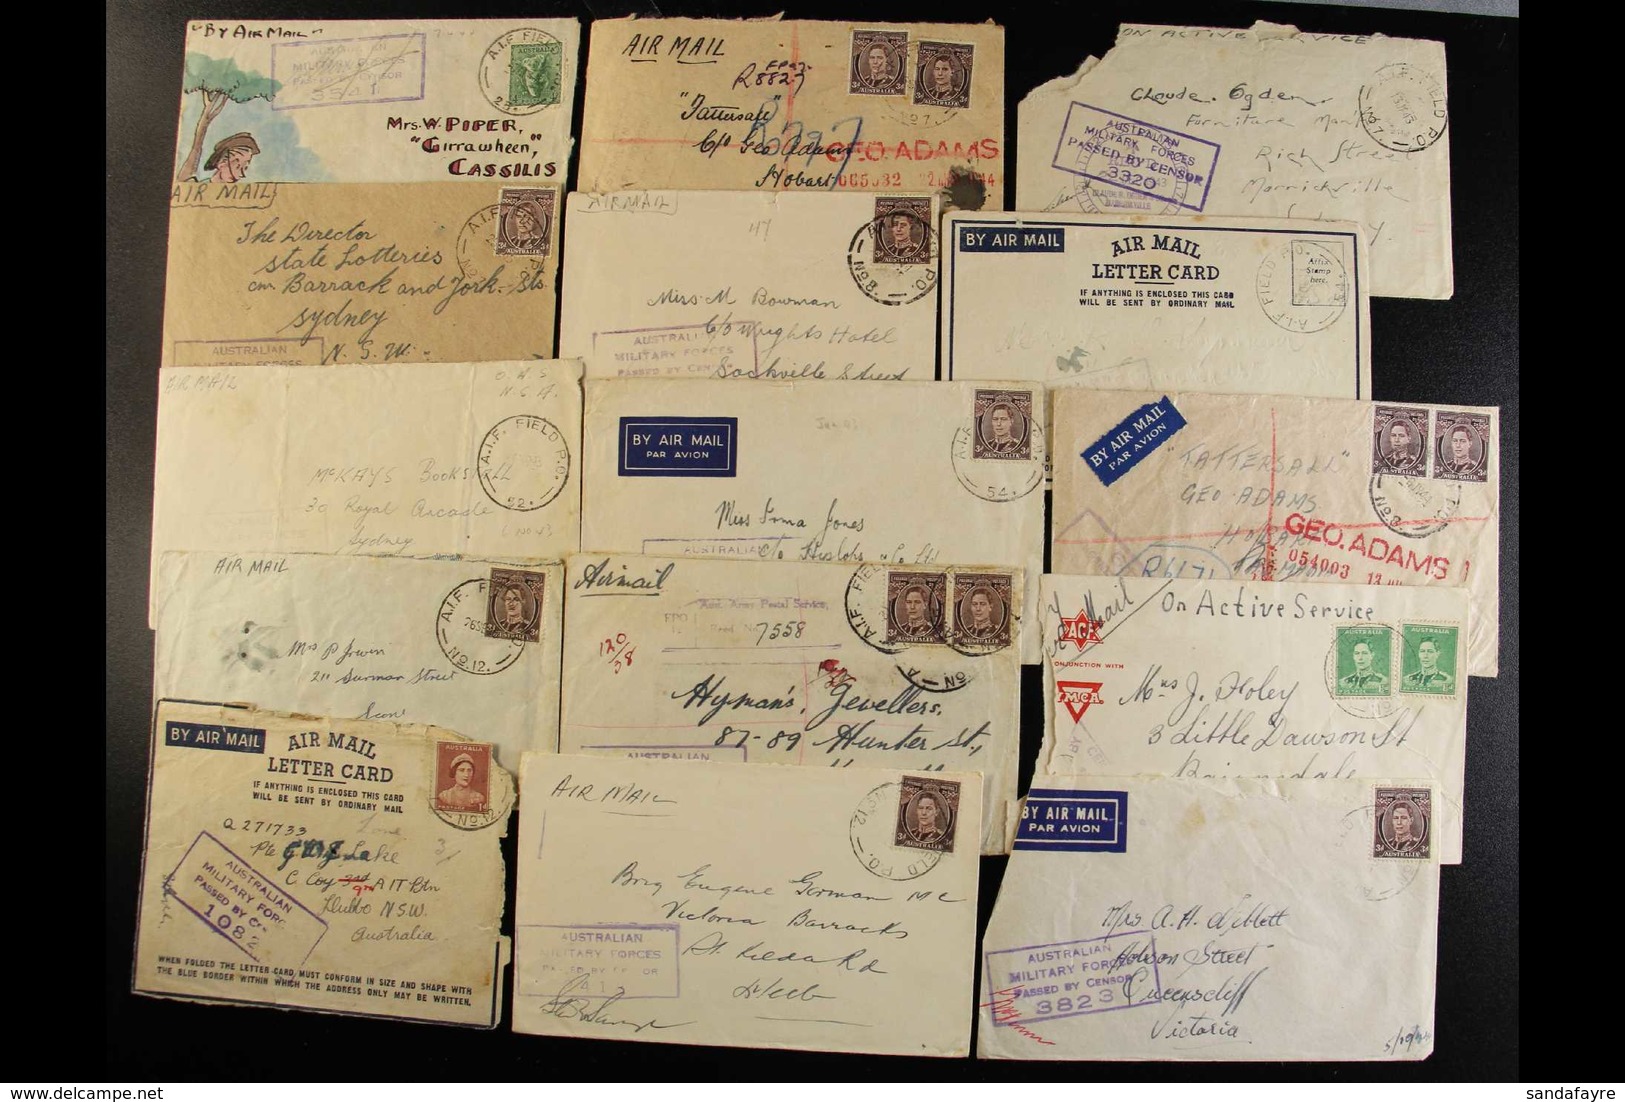 WW2 AUSTRALIAN FORCES - A.I.F. FIELD P.O. DATESTAMPS A Fine Collection Of Covers (couple Of Fronts) Back To Australia, B - Papua-Neuguinea